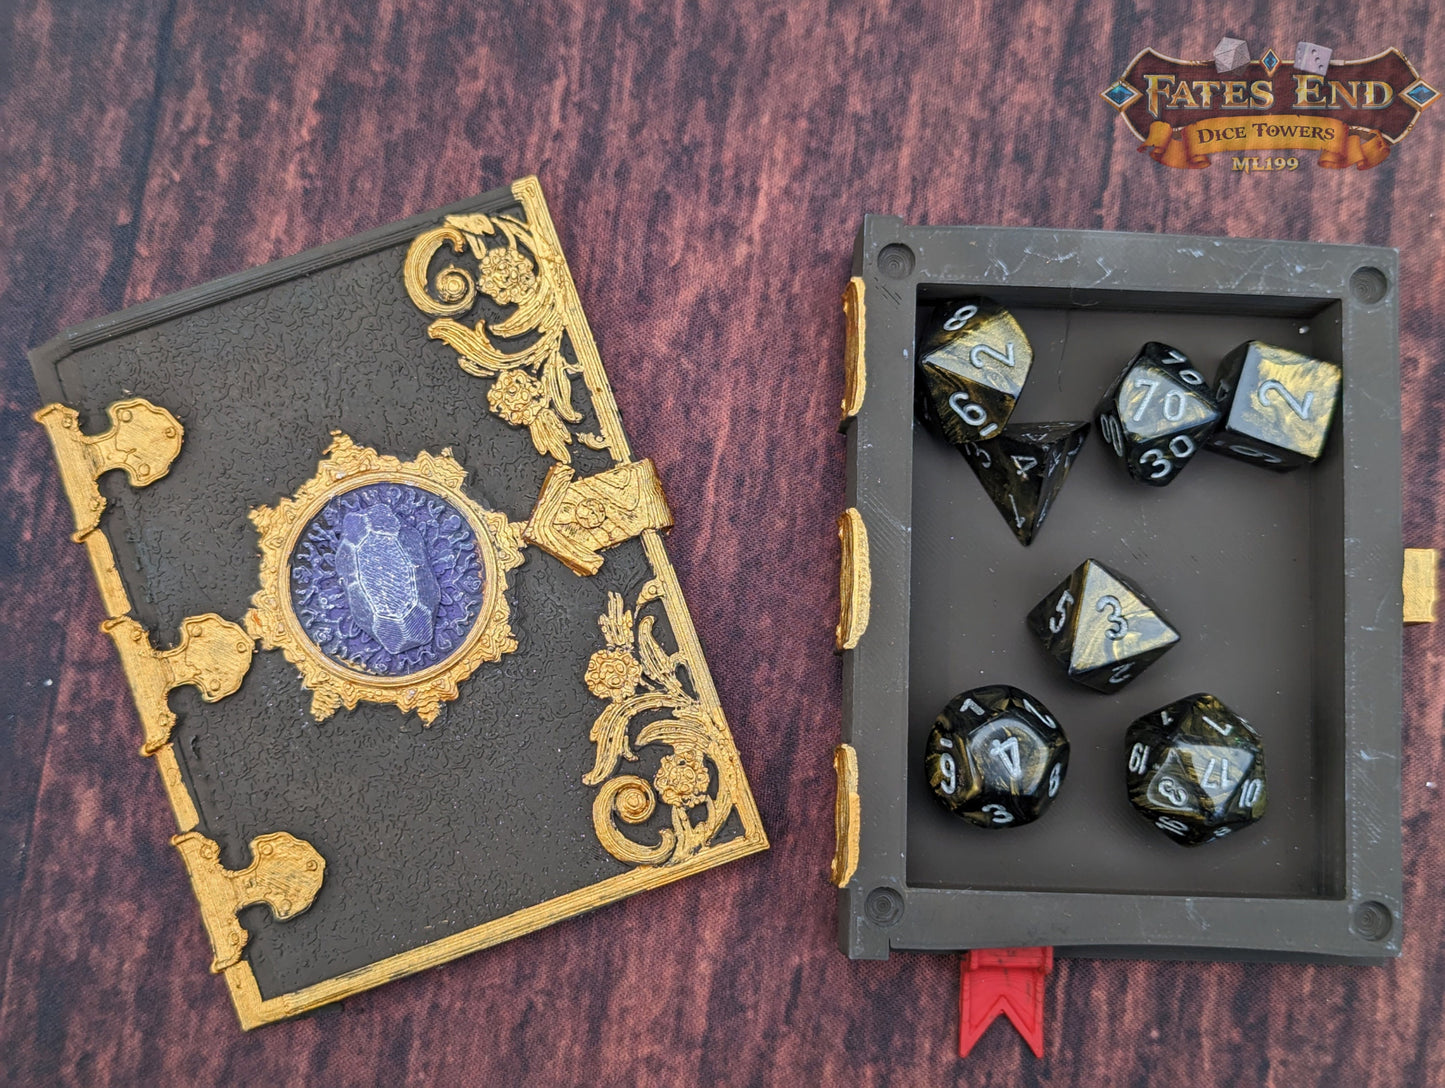 Magic Tome Card Holder-Dice Vault-Fate's End-Furhaven